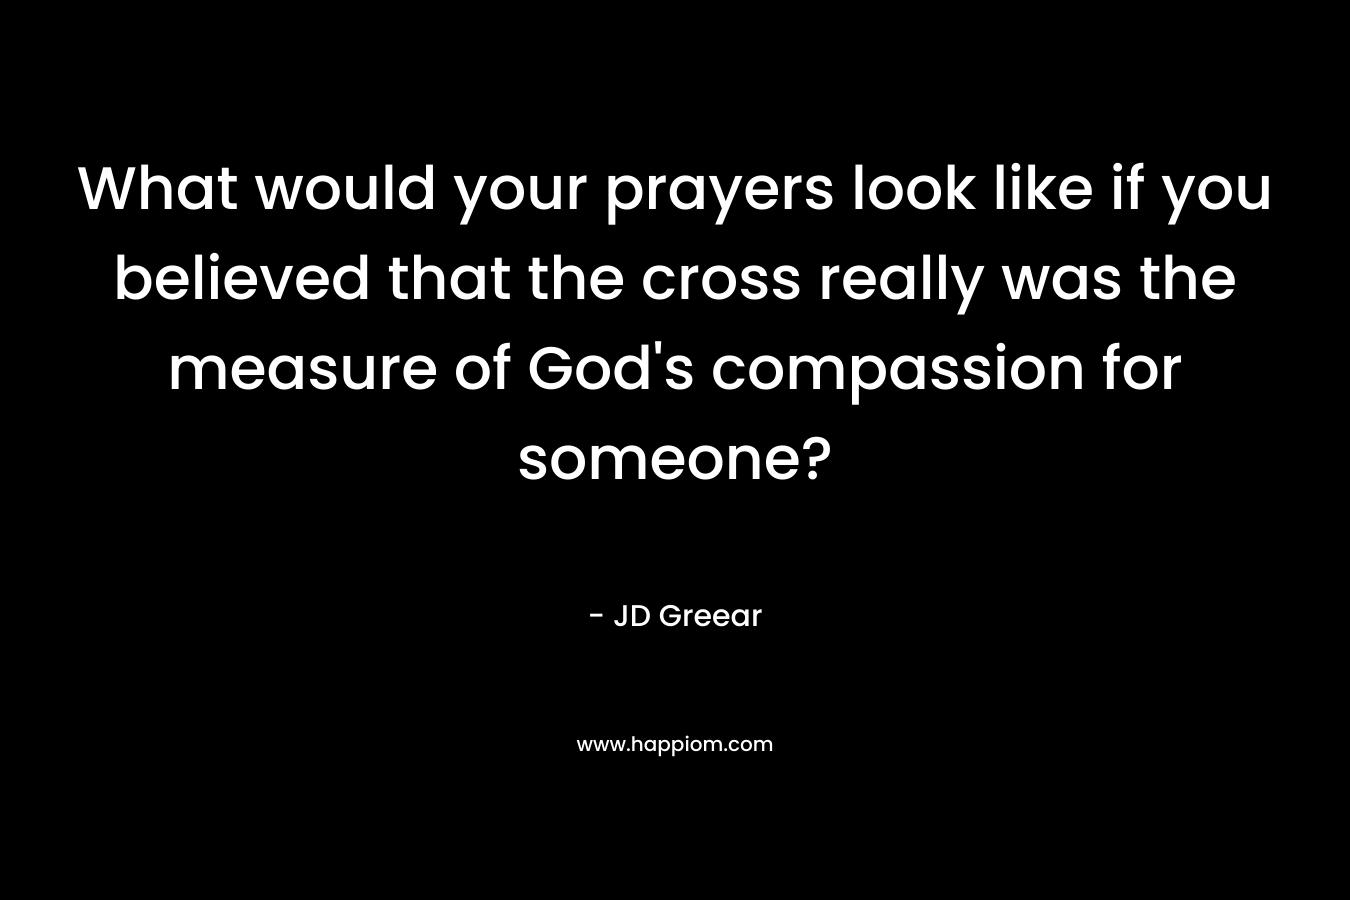 What would your prayers look like if you believed that the cross really was the measure of God’s compassion for someone? – JD Greear